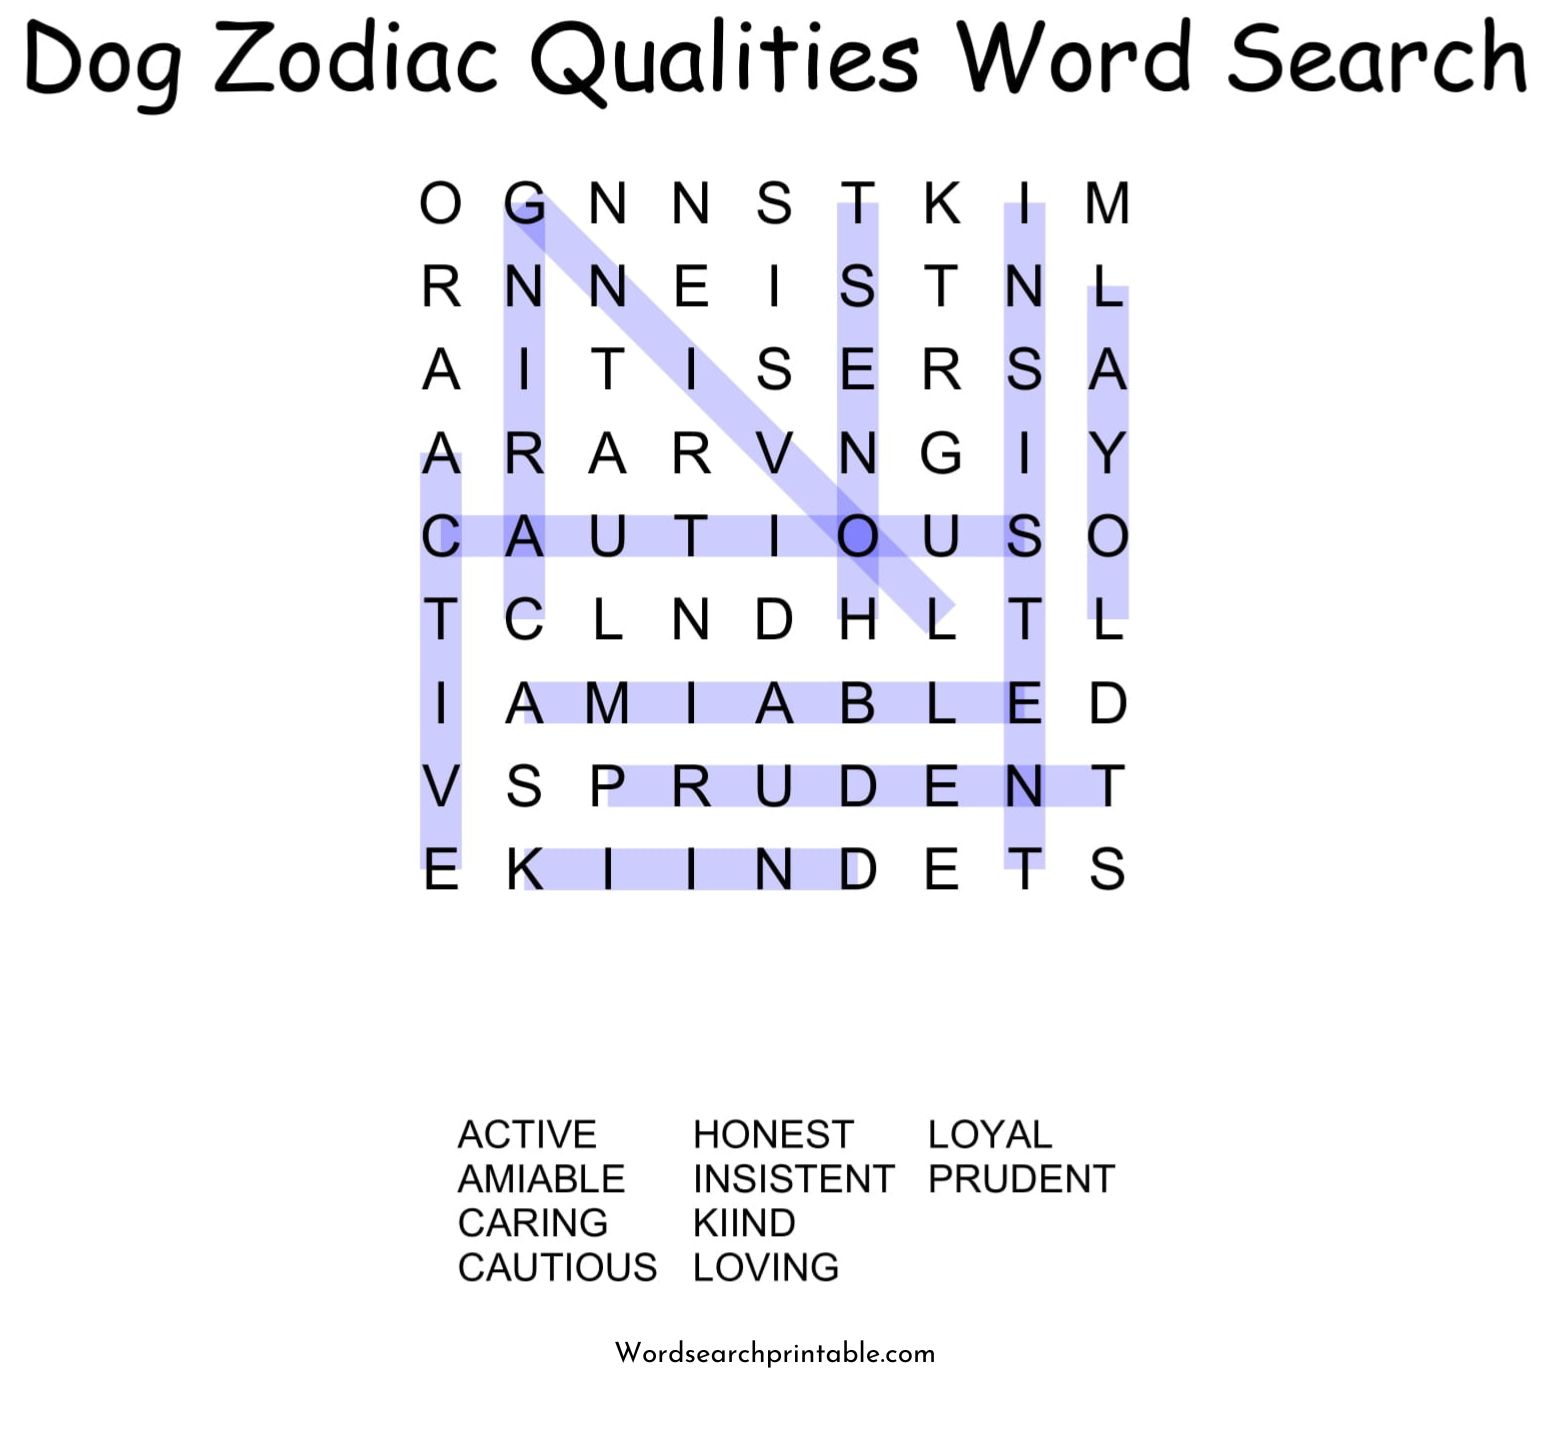 dog zodiac qualities word search puzzle solution